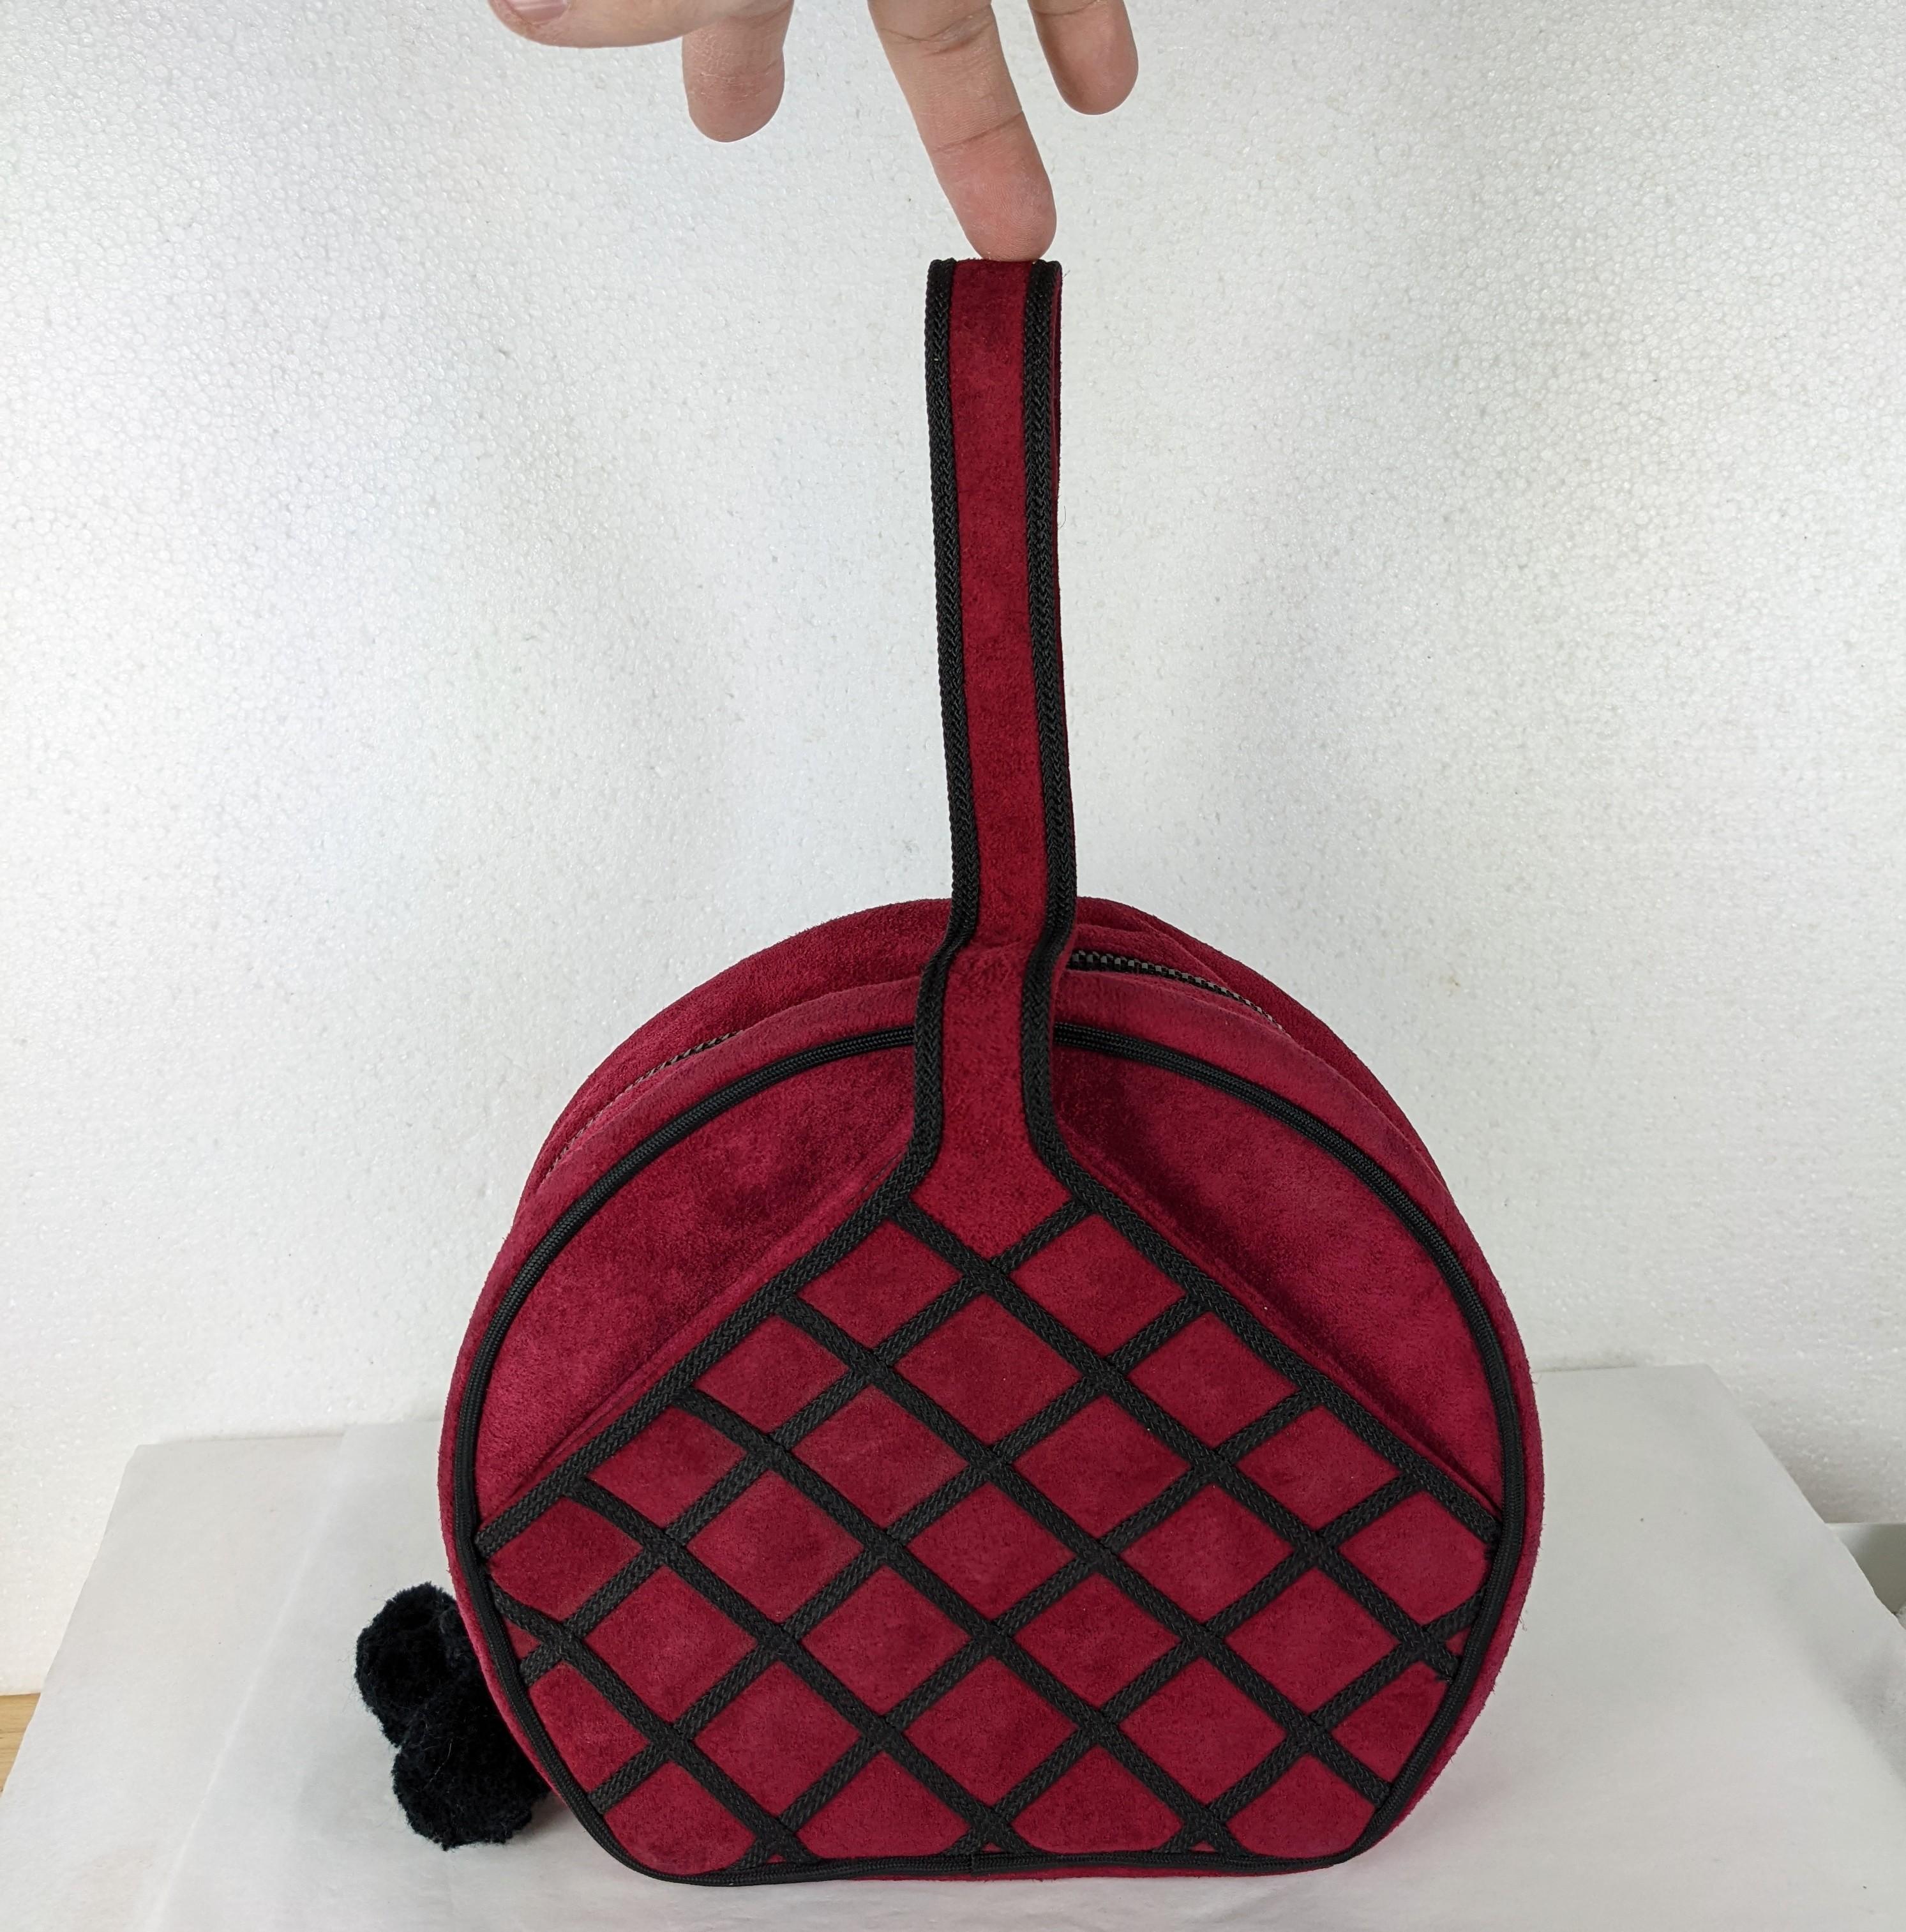 Renaud Pelligrino Deep Rasberry Suede and Soutache Bag from France 1990's. Unusual handled round bag with zip closure. Black soutache is stitched in a lattice work pattern and there are 2 side exterior pockets. Lined in black faille. Pom pom zipper